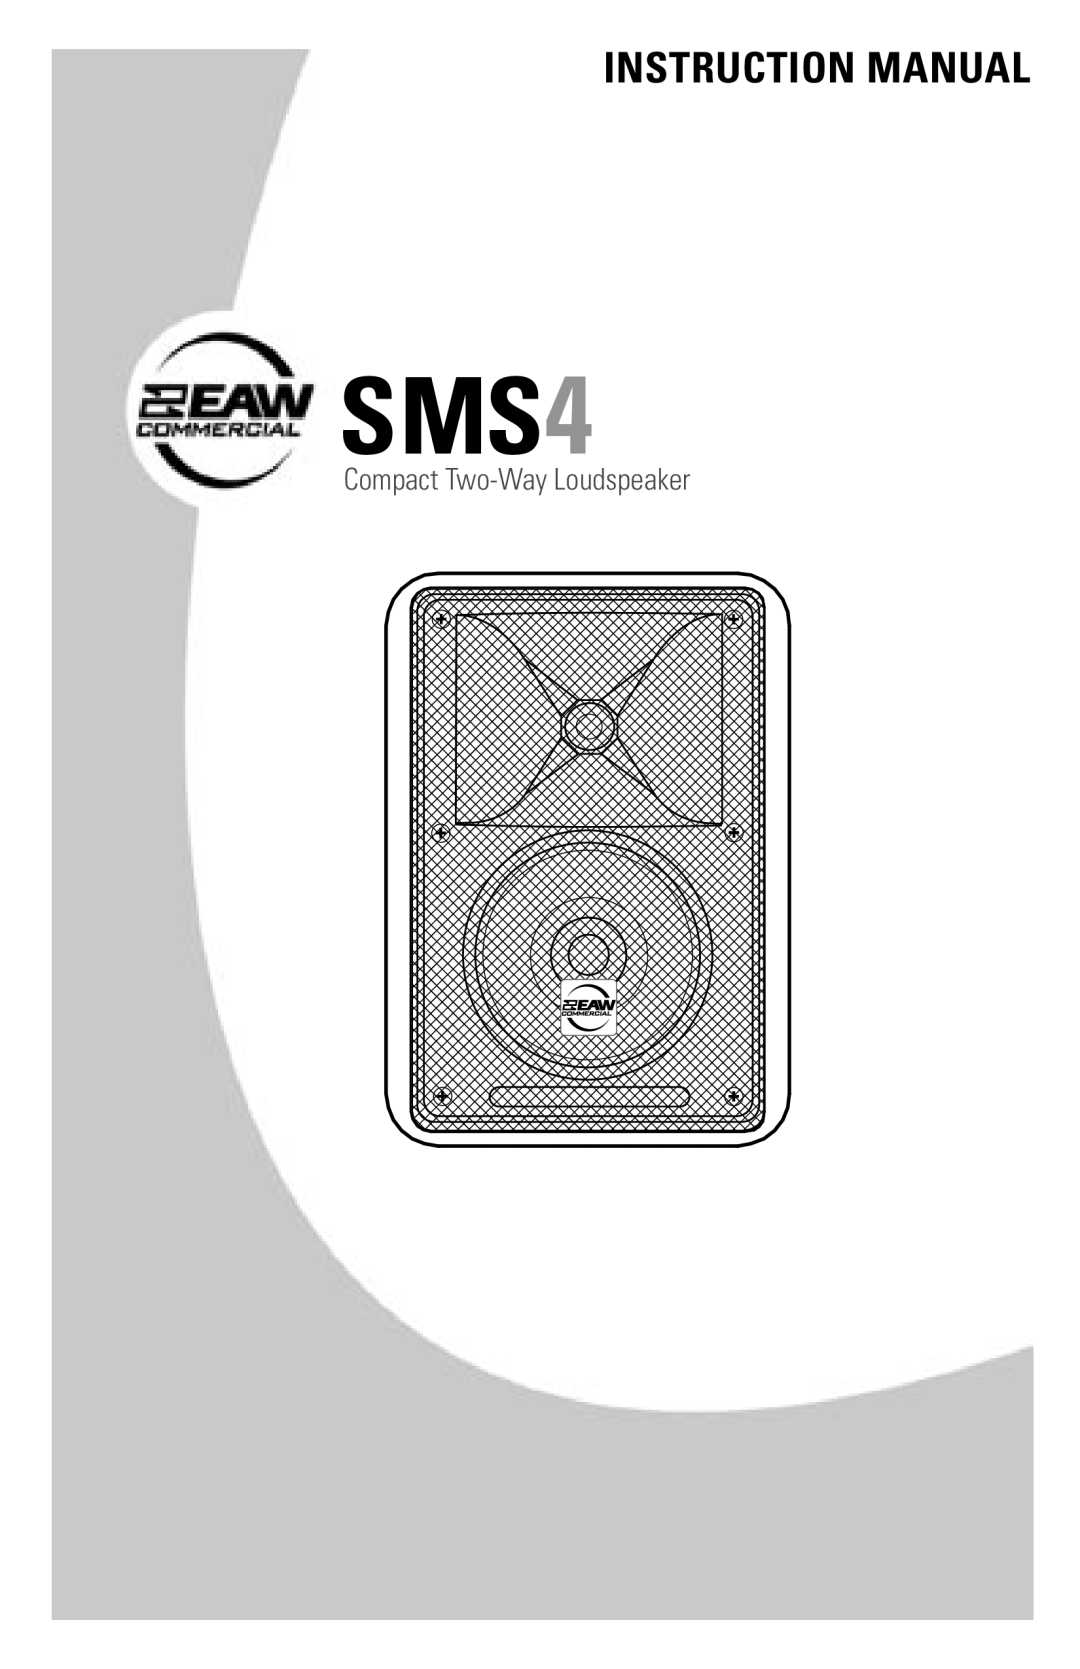 EAW SMS4 instruction manual Compact Two-WayLoudspeaker 